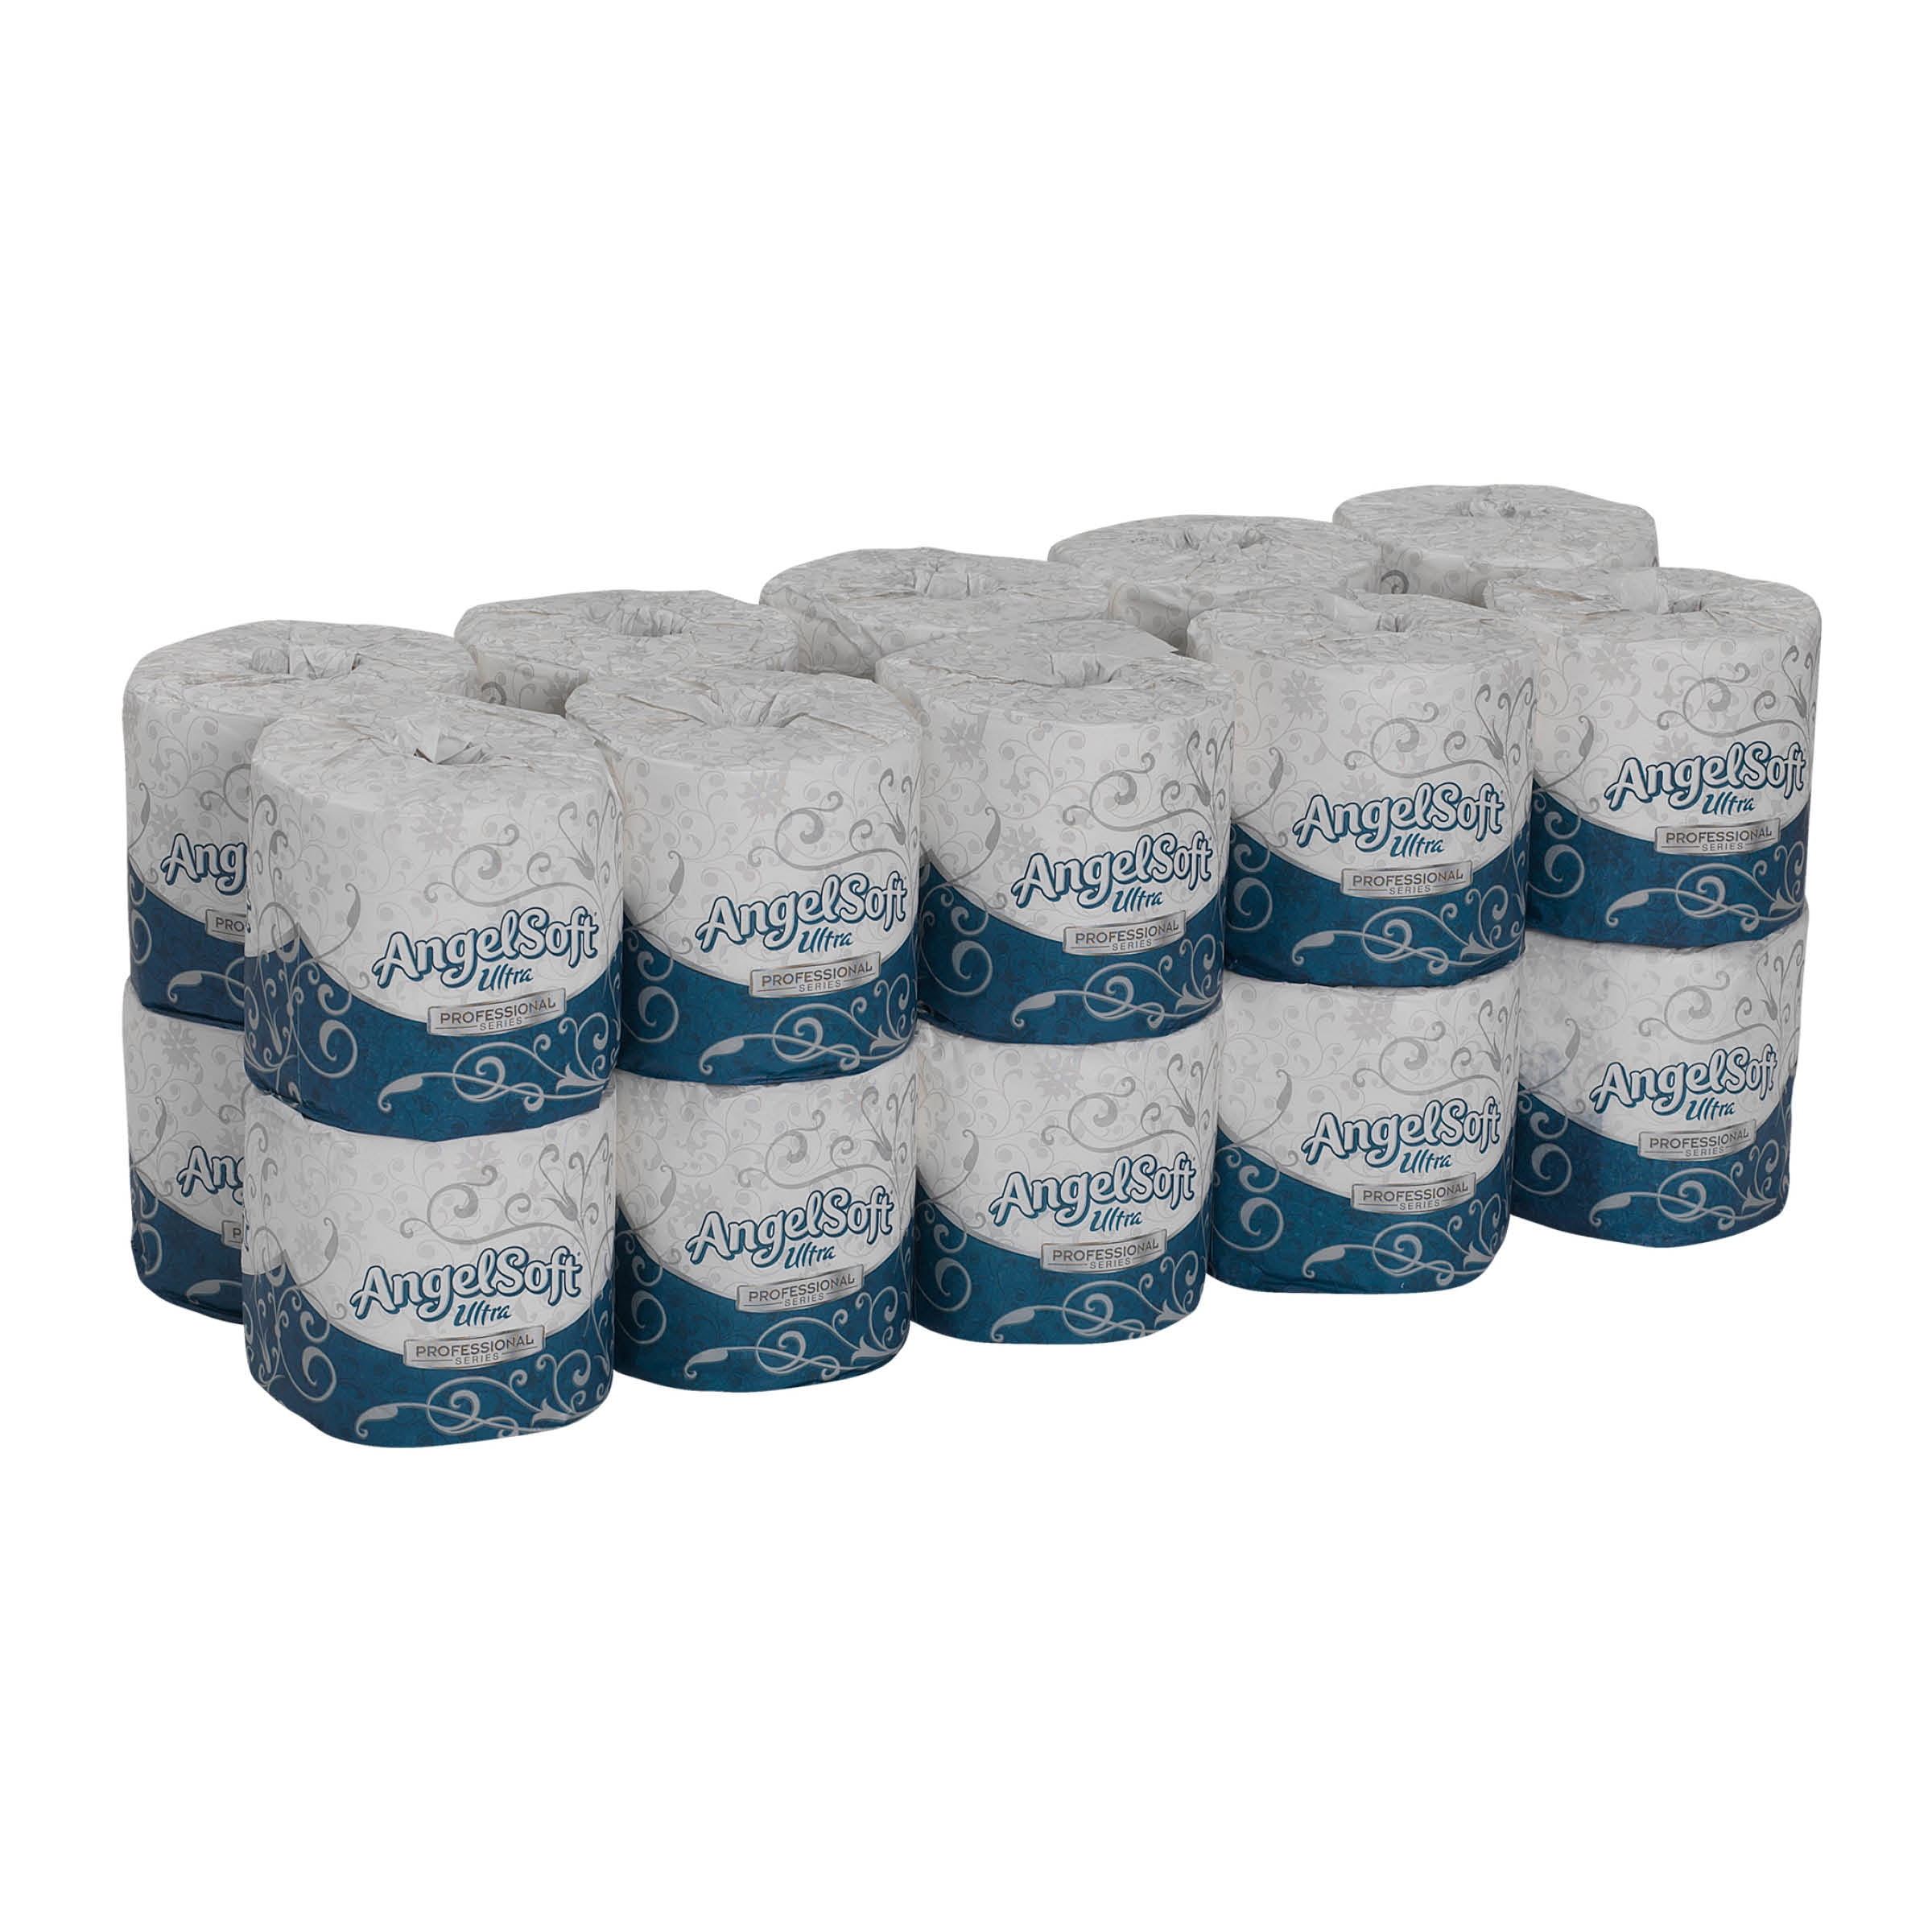 16620 Angel Soft Professional Series Premium 2-Ply Embossed Toilet Paper by GP PRO 20 Rolls Per Convenience Case Georgia Pacific GID-881591 450 Sheets Per Roll Georgia-Pacific 